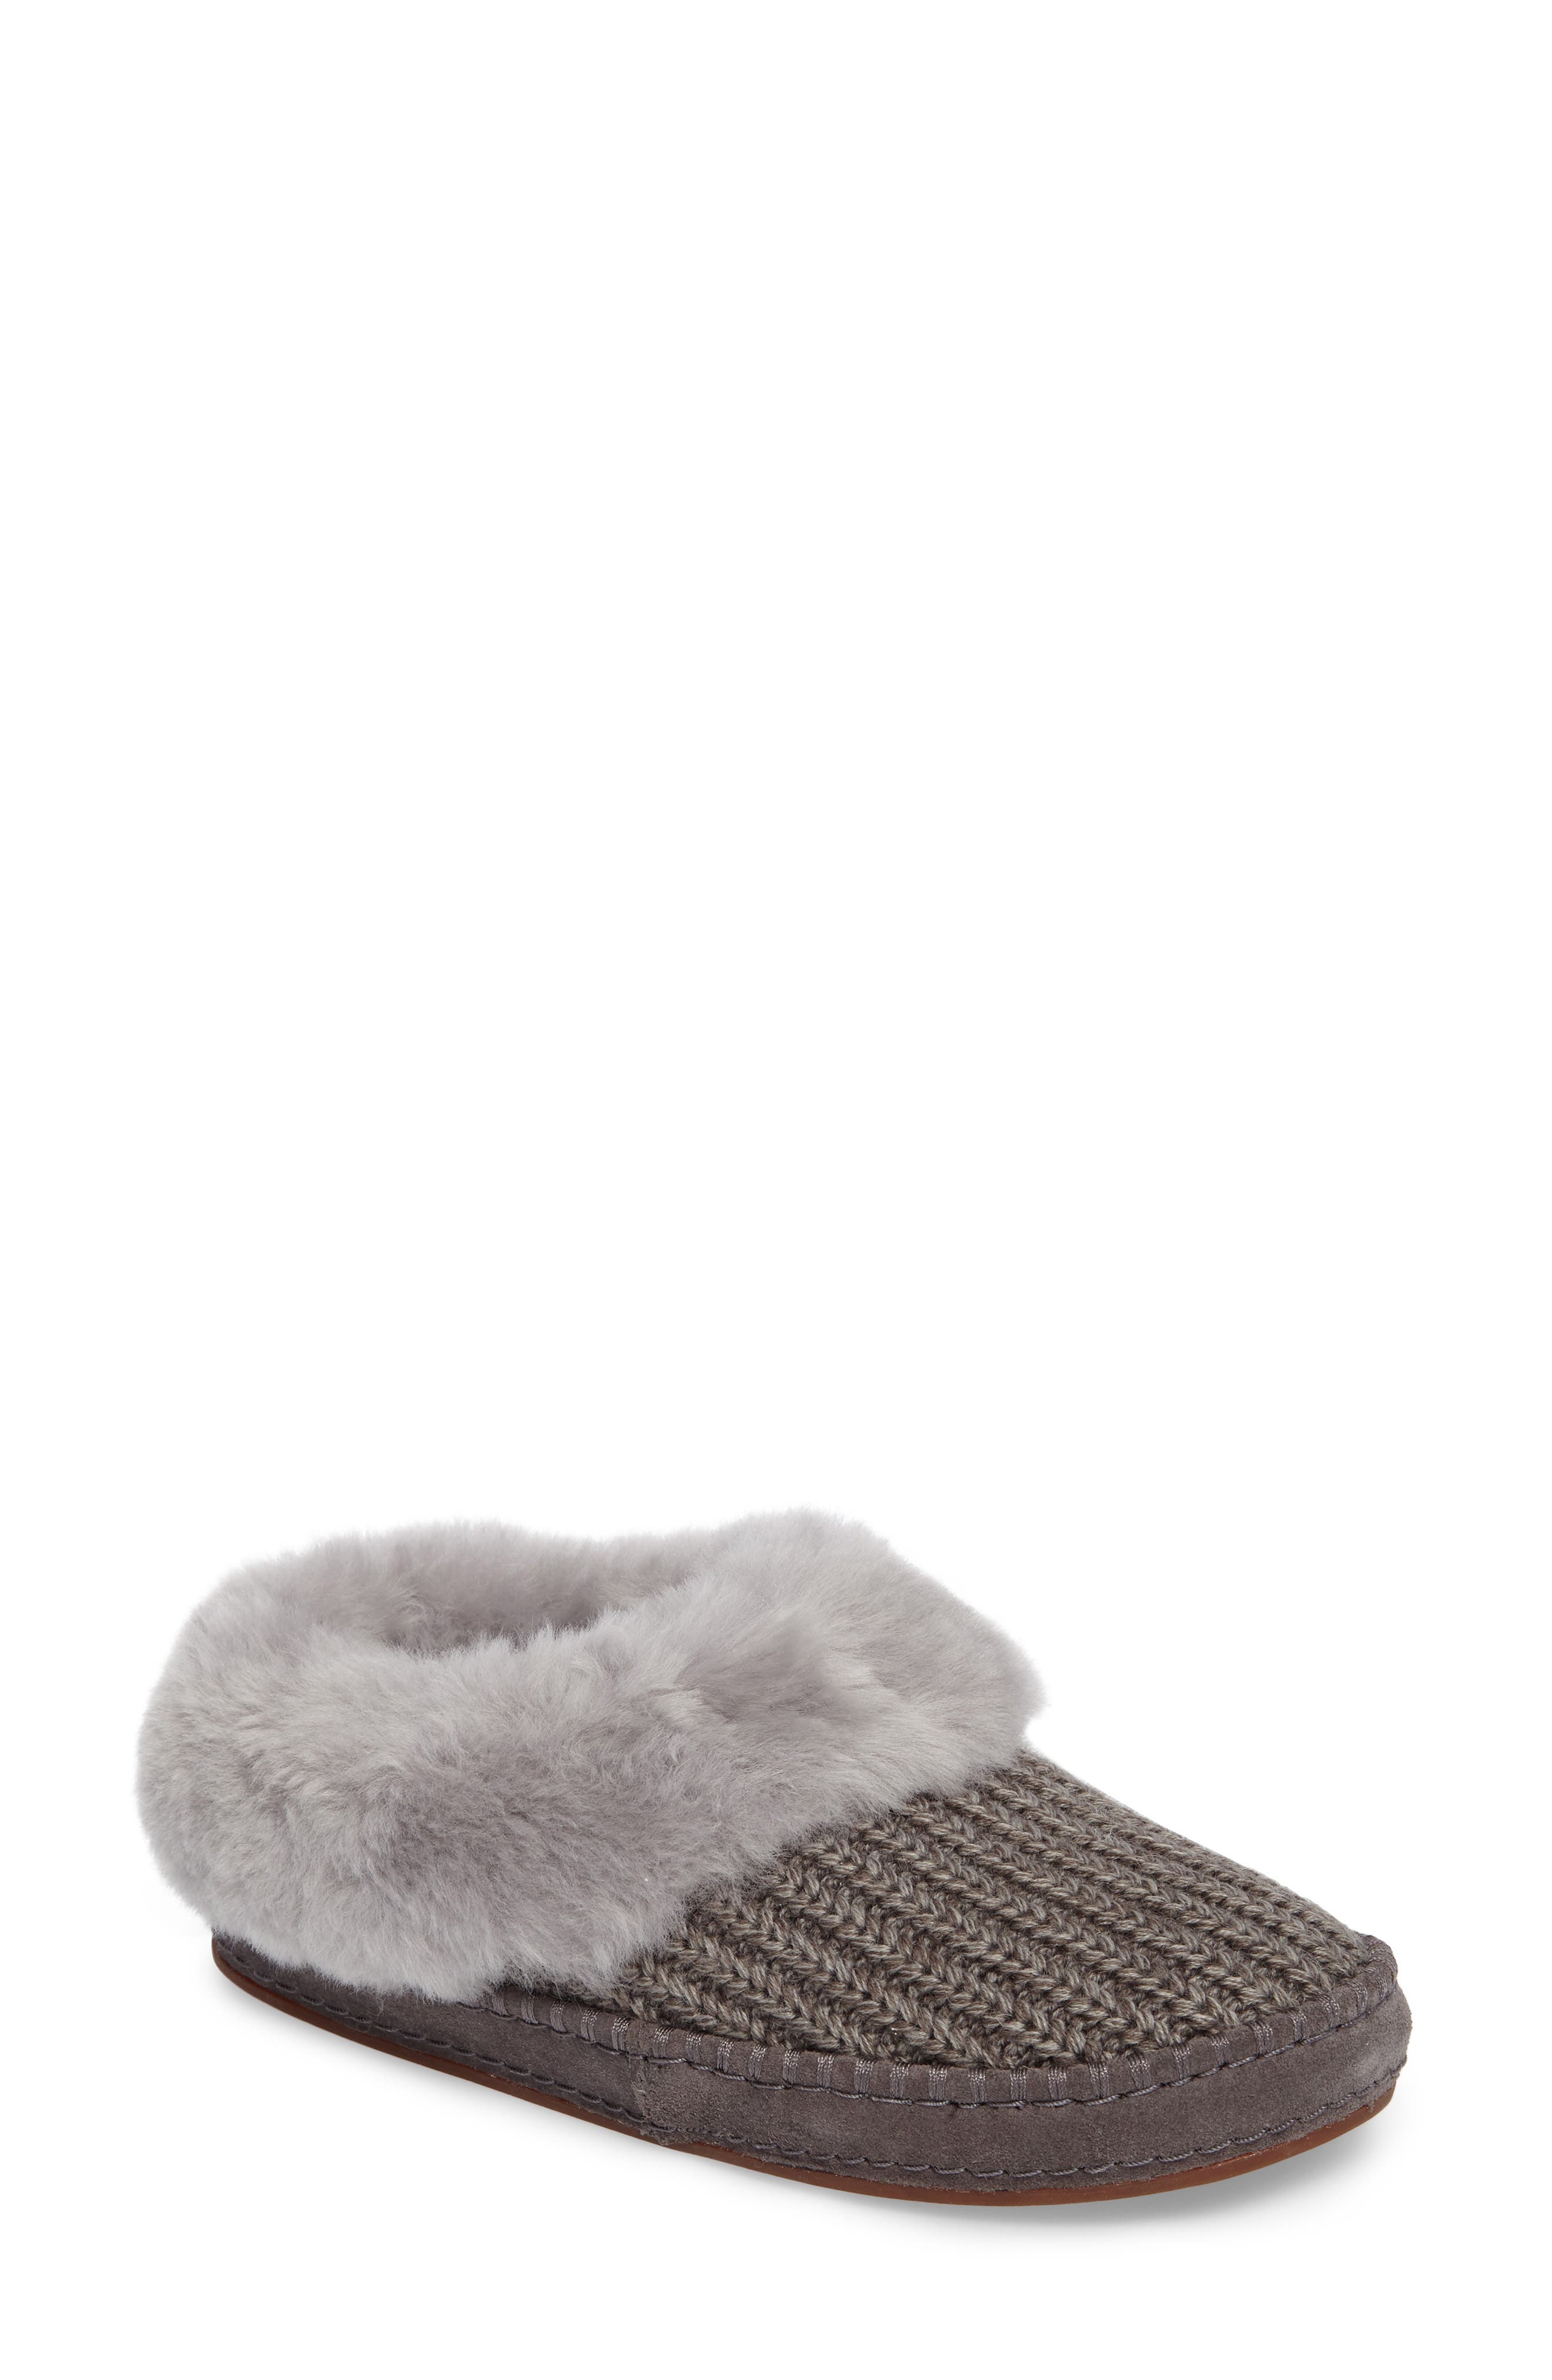 ugg knit slippers sale